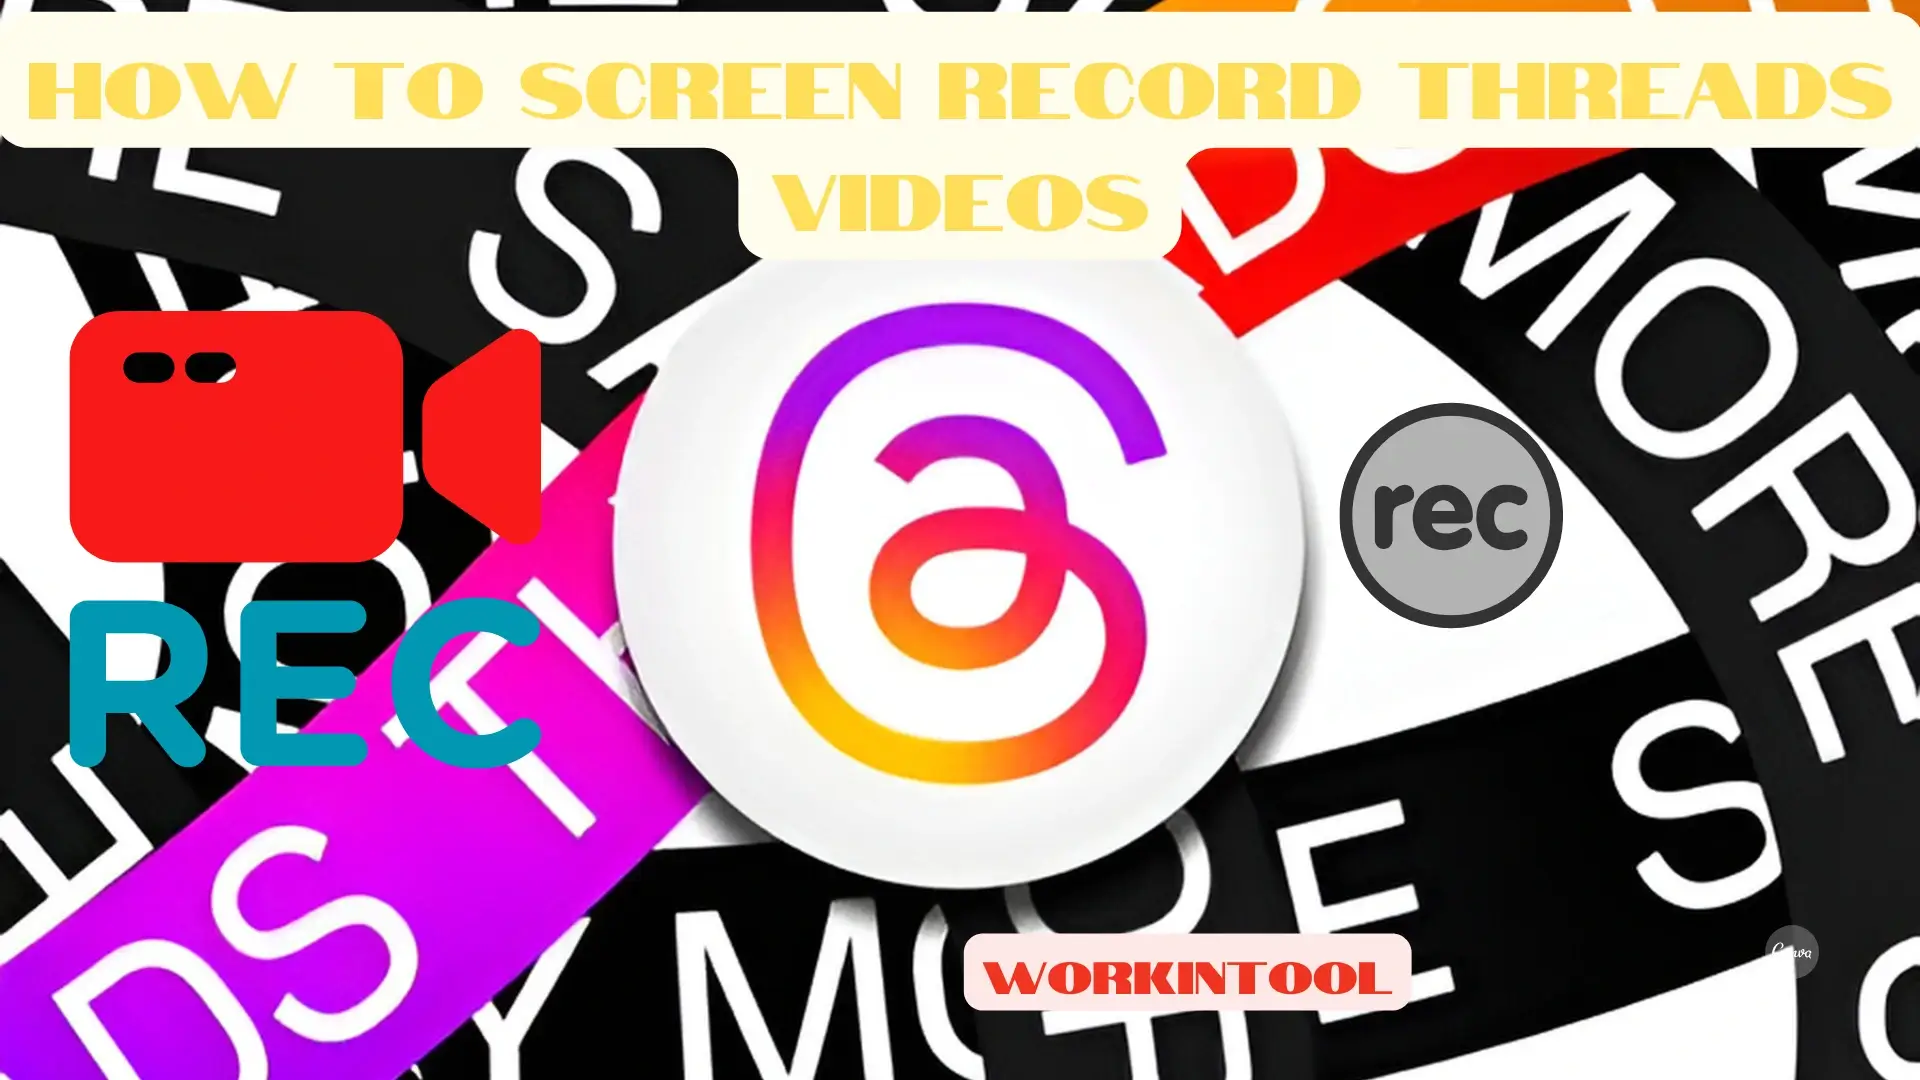 featured image for how to screen record threads videos